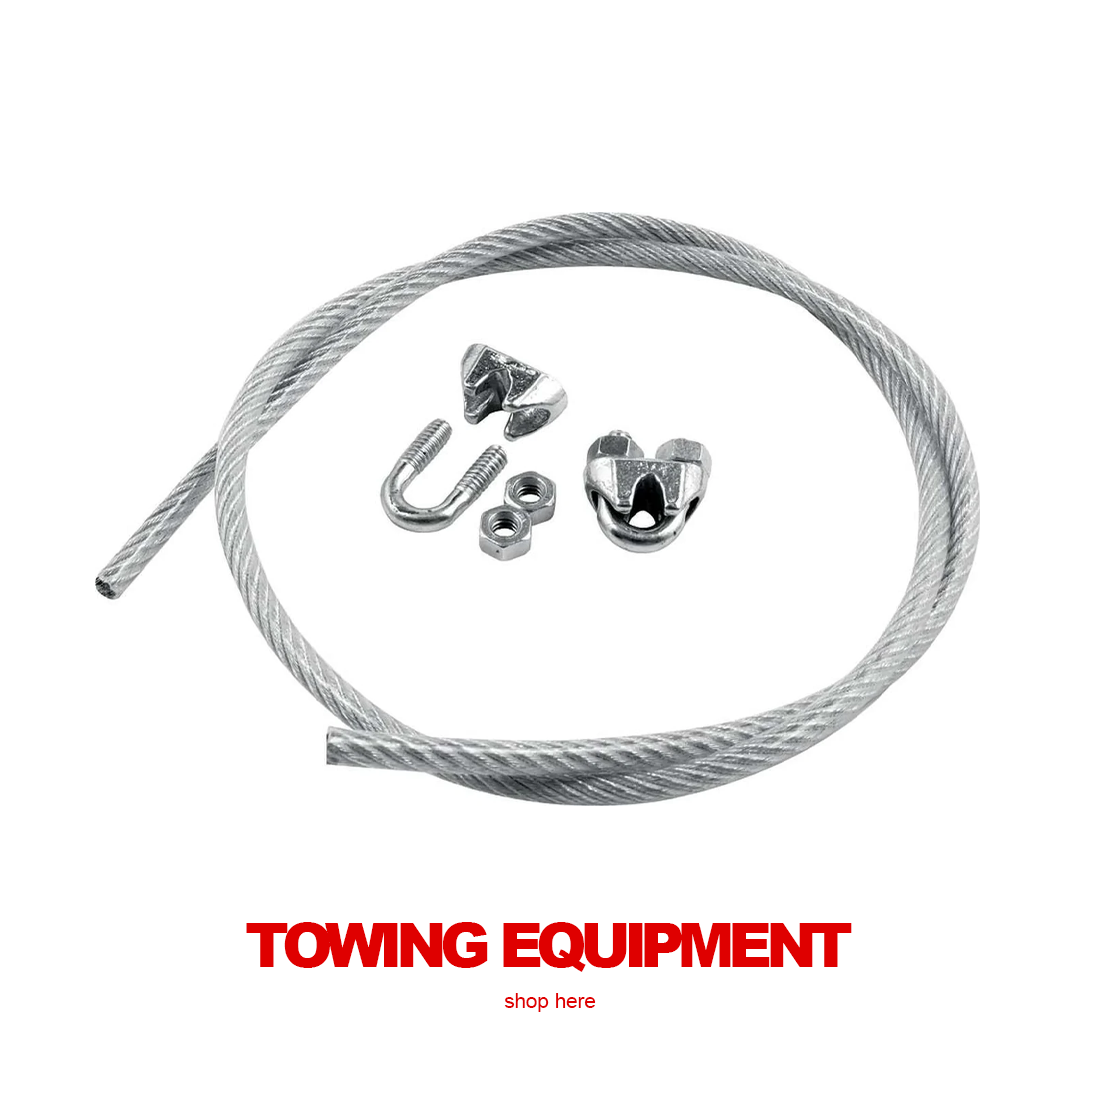 Circle Track Towing Equipment